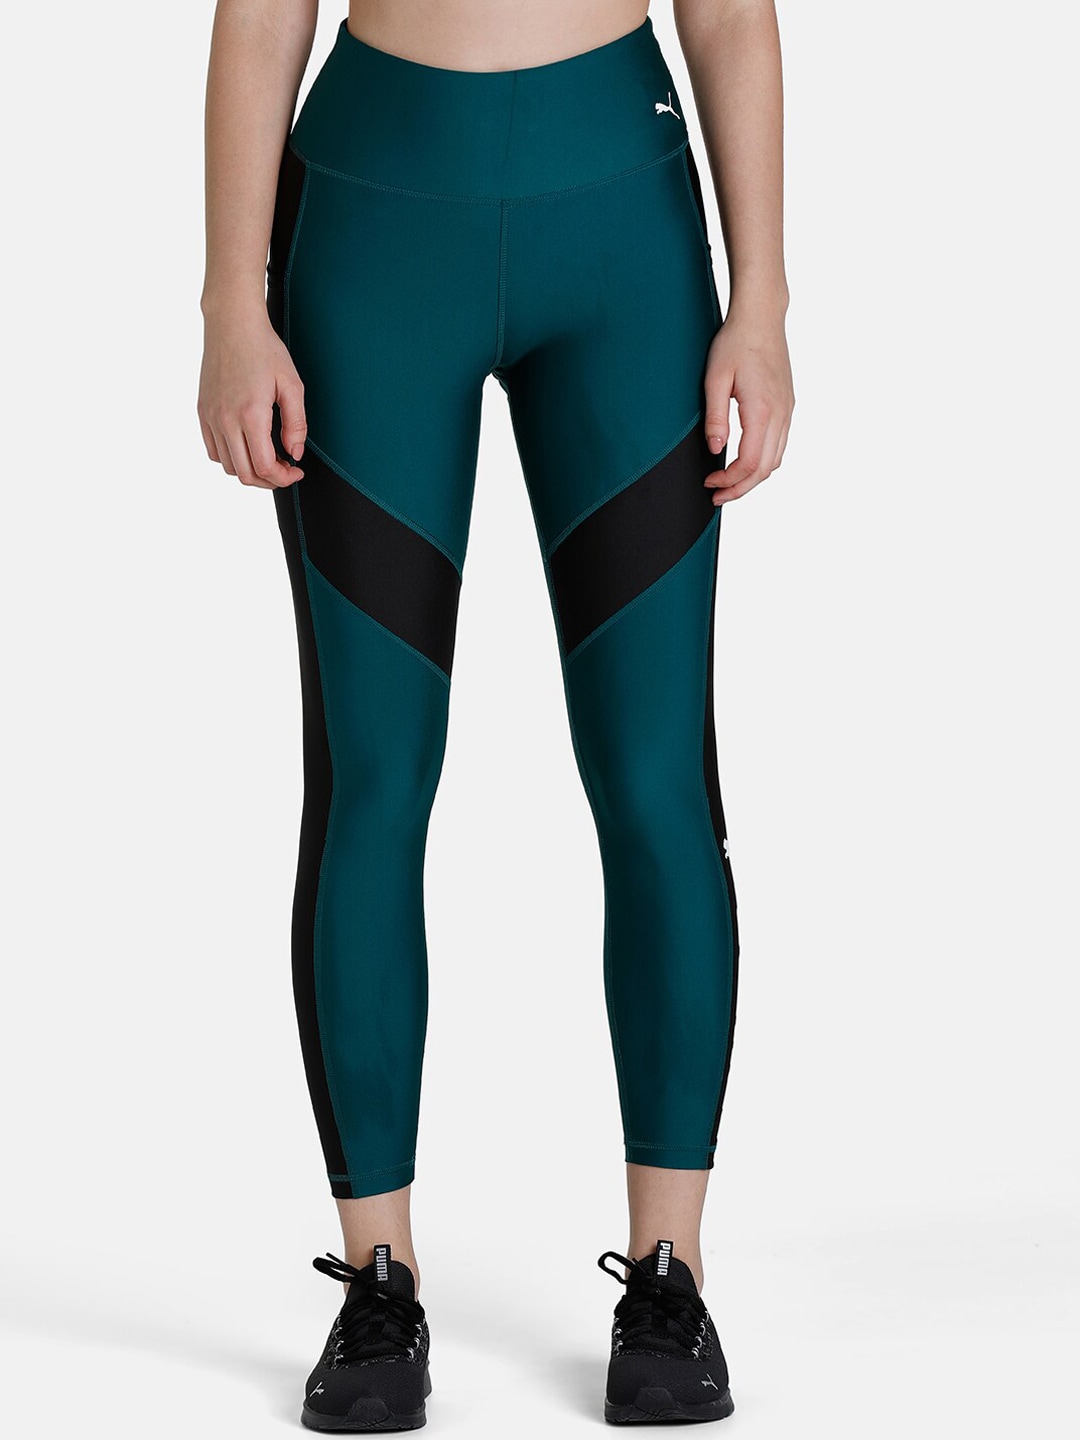 Puma Women Green Colourblocked Ankle Length Tights Price in India